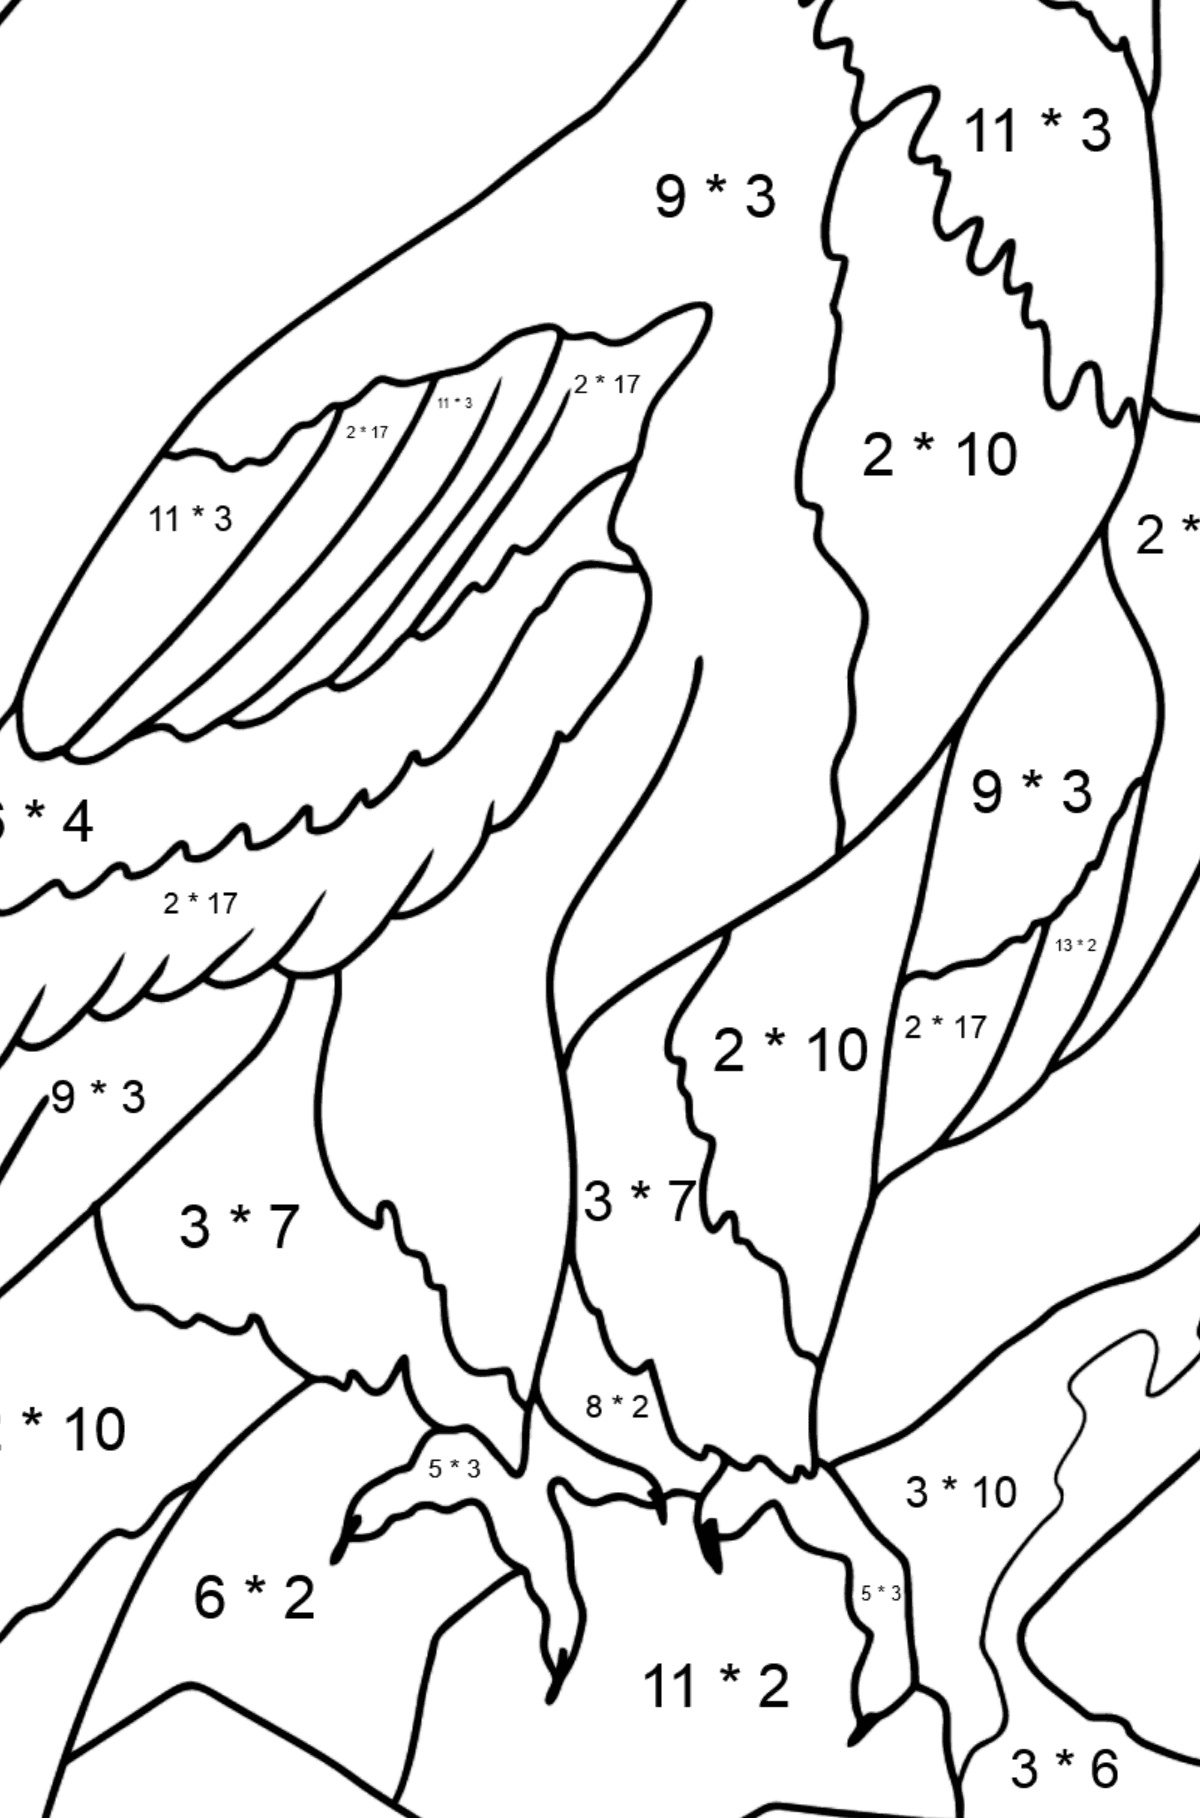 Coloring Page - An Eagle is Looking for Prey - Math Coloring - Multiplication for Kids